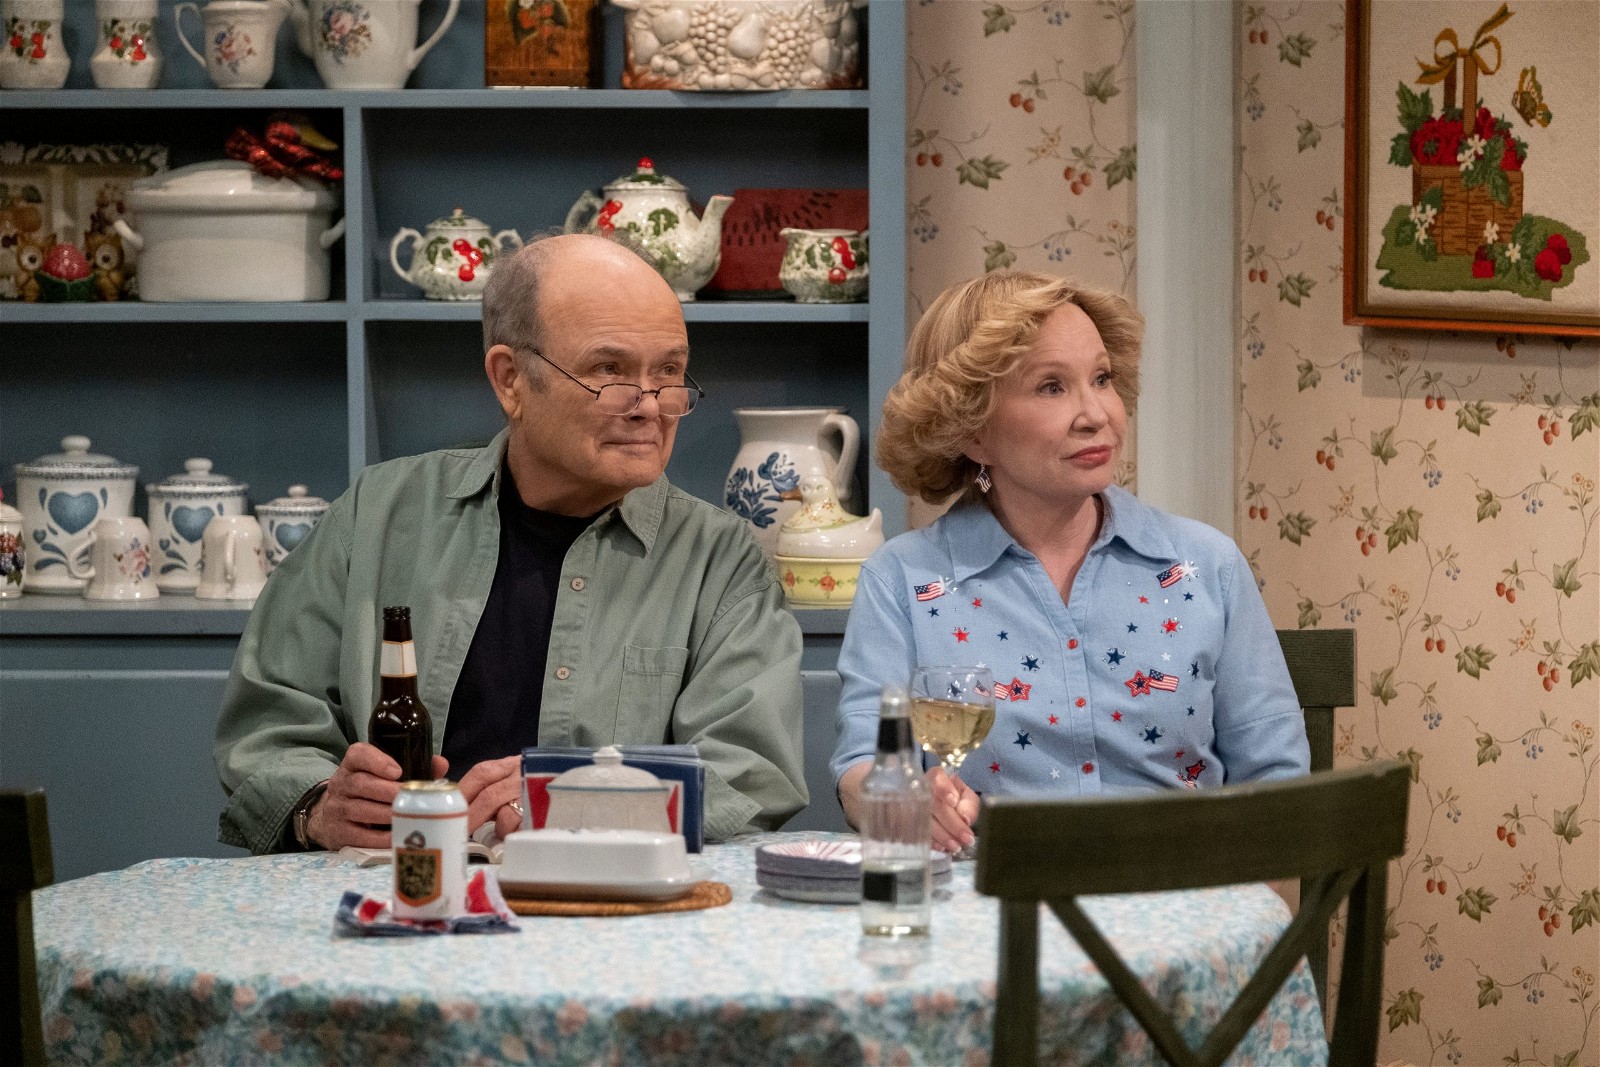 That ‘90s Show. (L to R) Kurtwood Smith as Red Forman, Debra Jo Rupp as Kitty Forman in episode 101 of That ‘90s Show. Cr. Patrick Wymore/Netflix © 2022